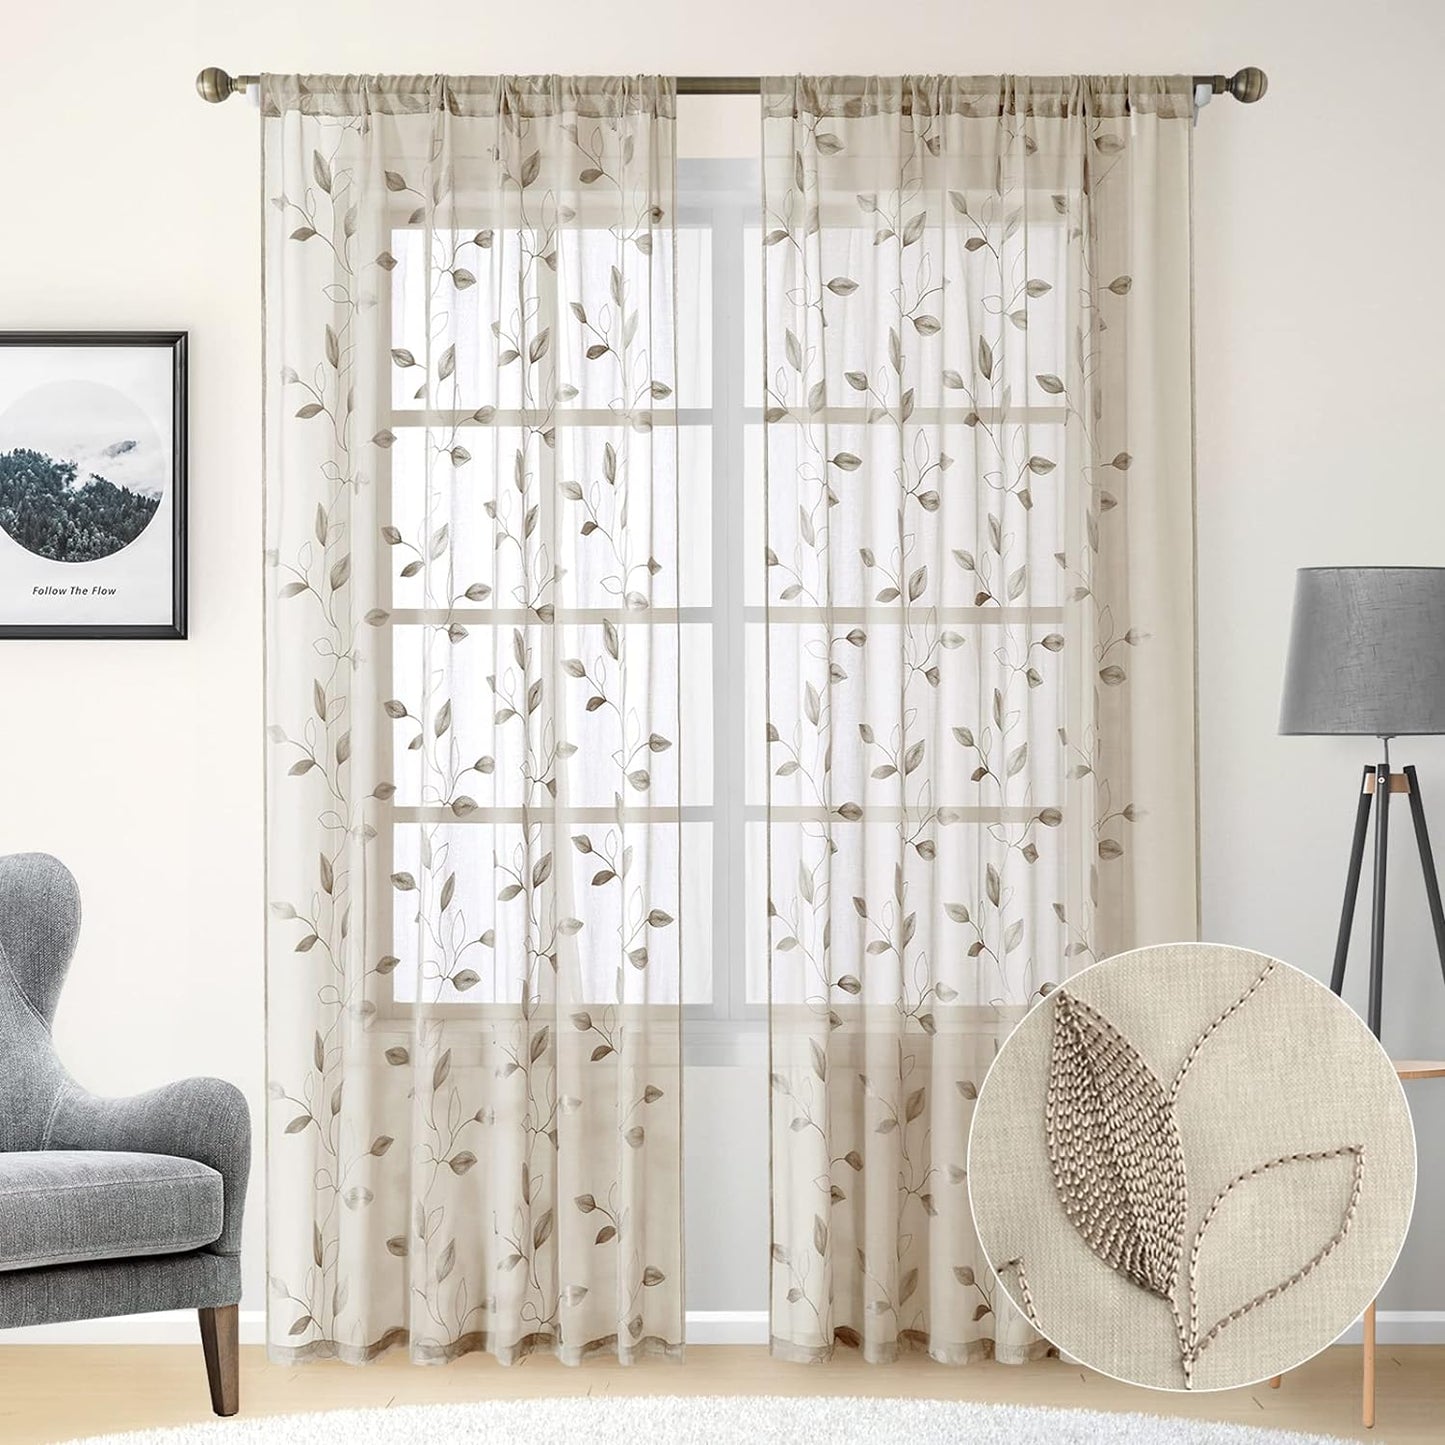 HOMEIDEAS Sage Green Sheer Curtains 52 X 63 Inches Length 2 Panels Embroidered Leaf Pattern Pocket Faux Linen Floral Semi Sheer Voile Window Curtains/Drapes for Bedroom Living Room  HOMEIDEAS 2-Taupe/Beige W52" X L96" 